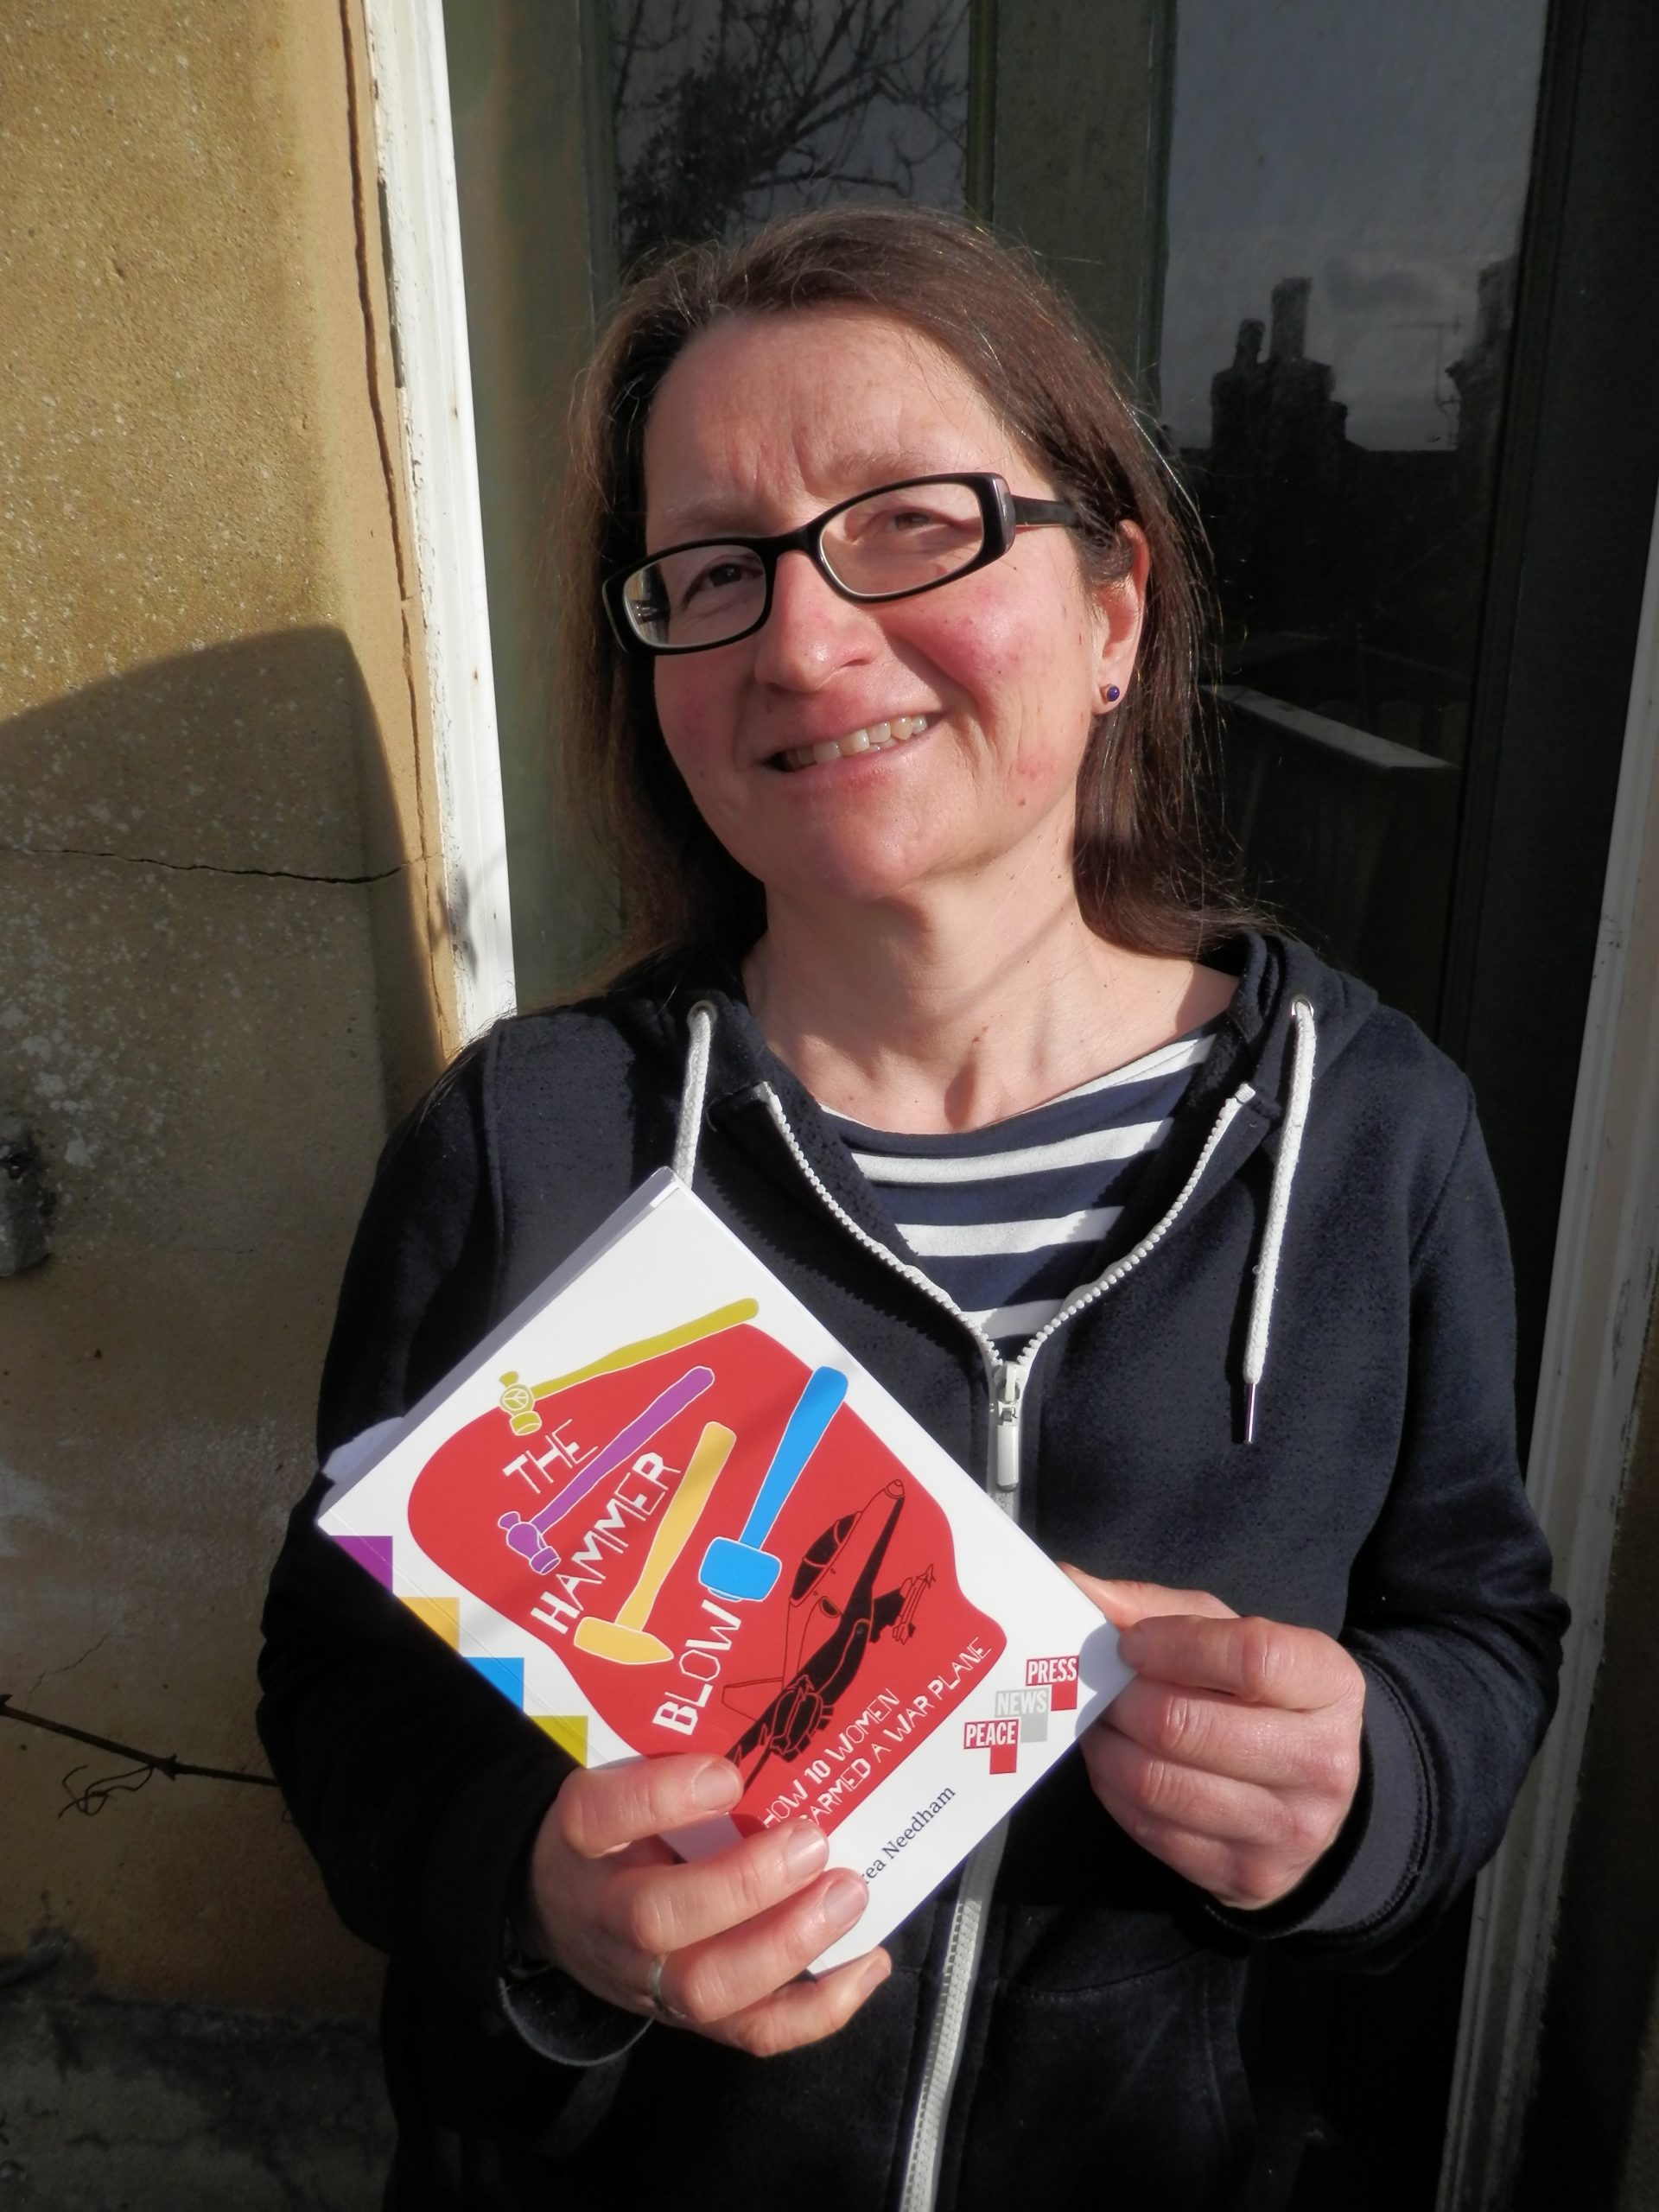 Andrea Needham with a copy of The Hammer Blow